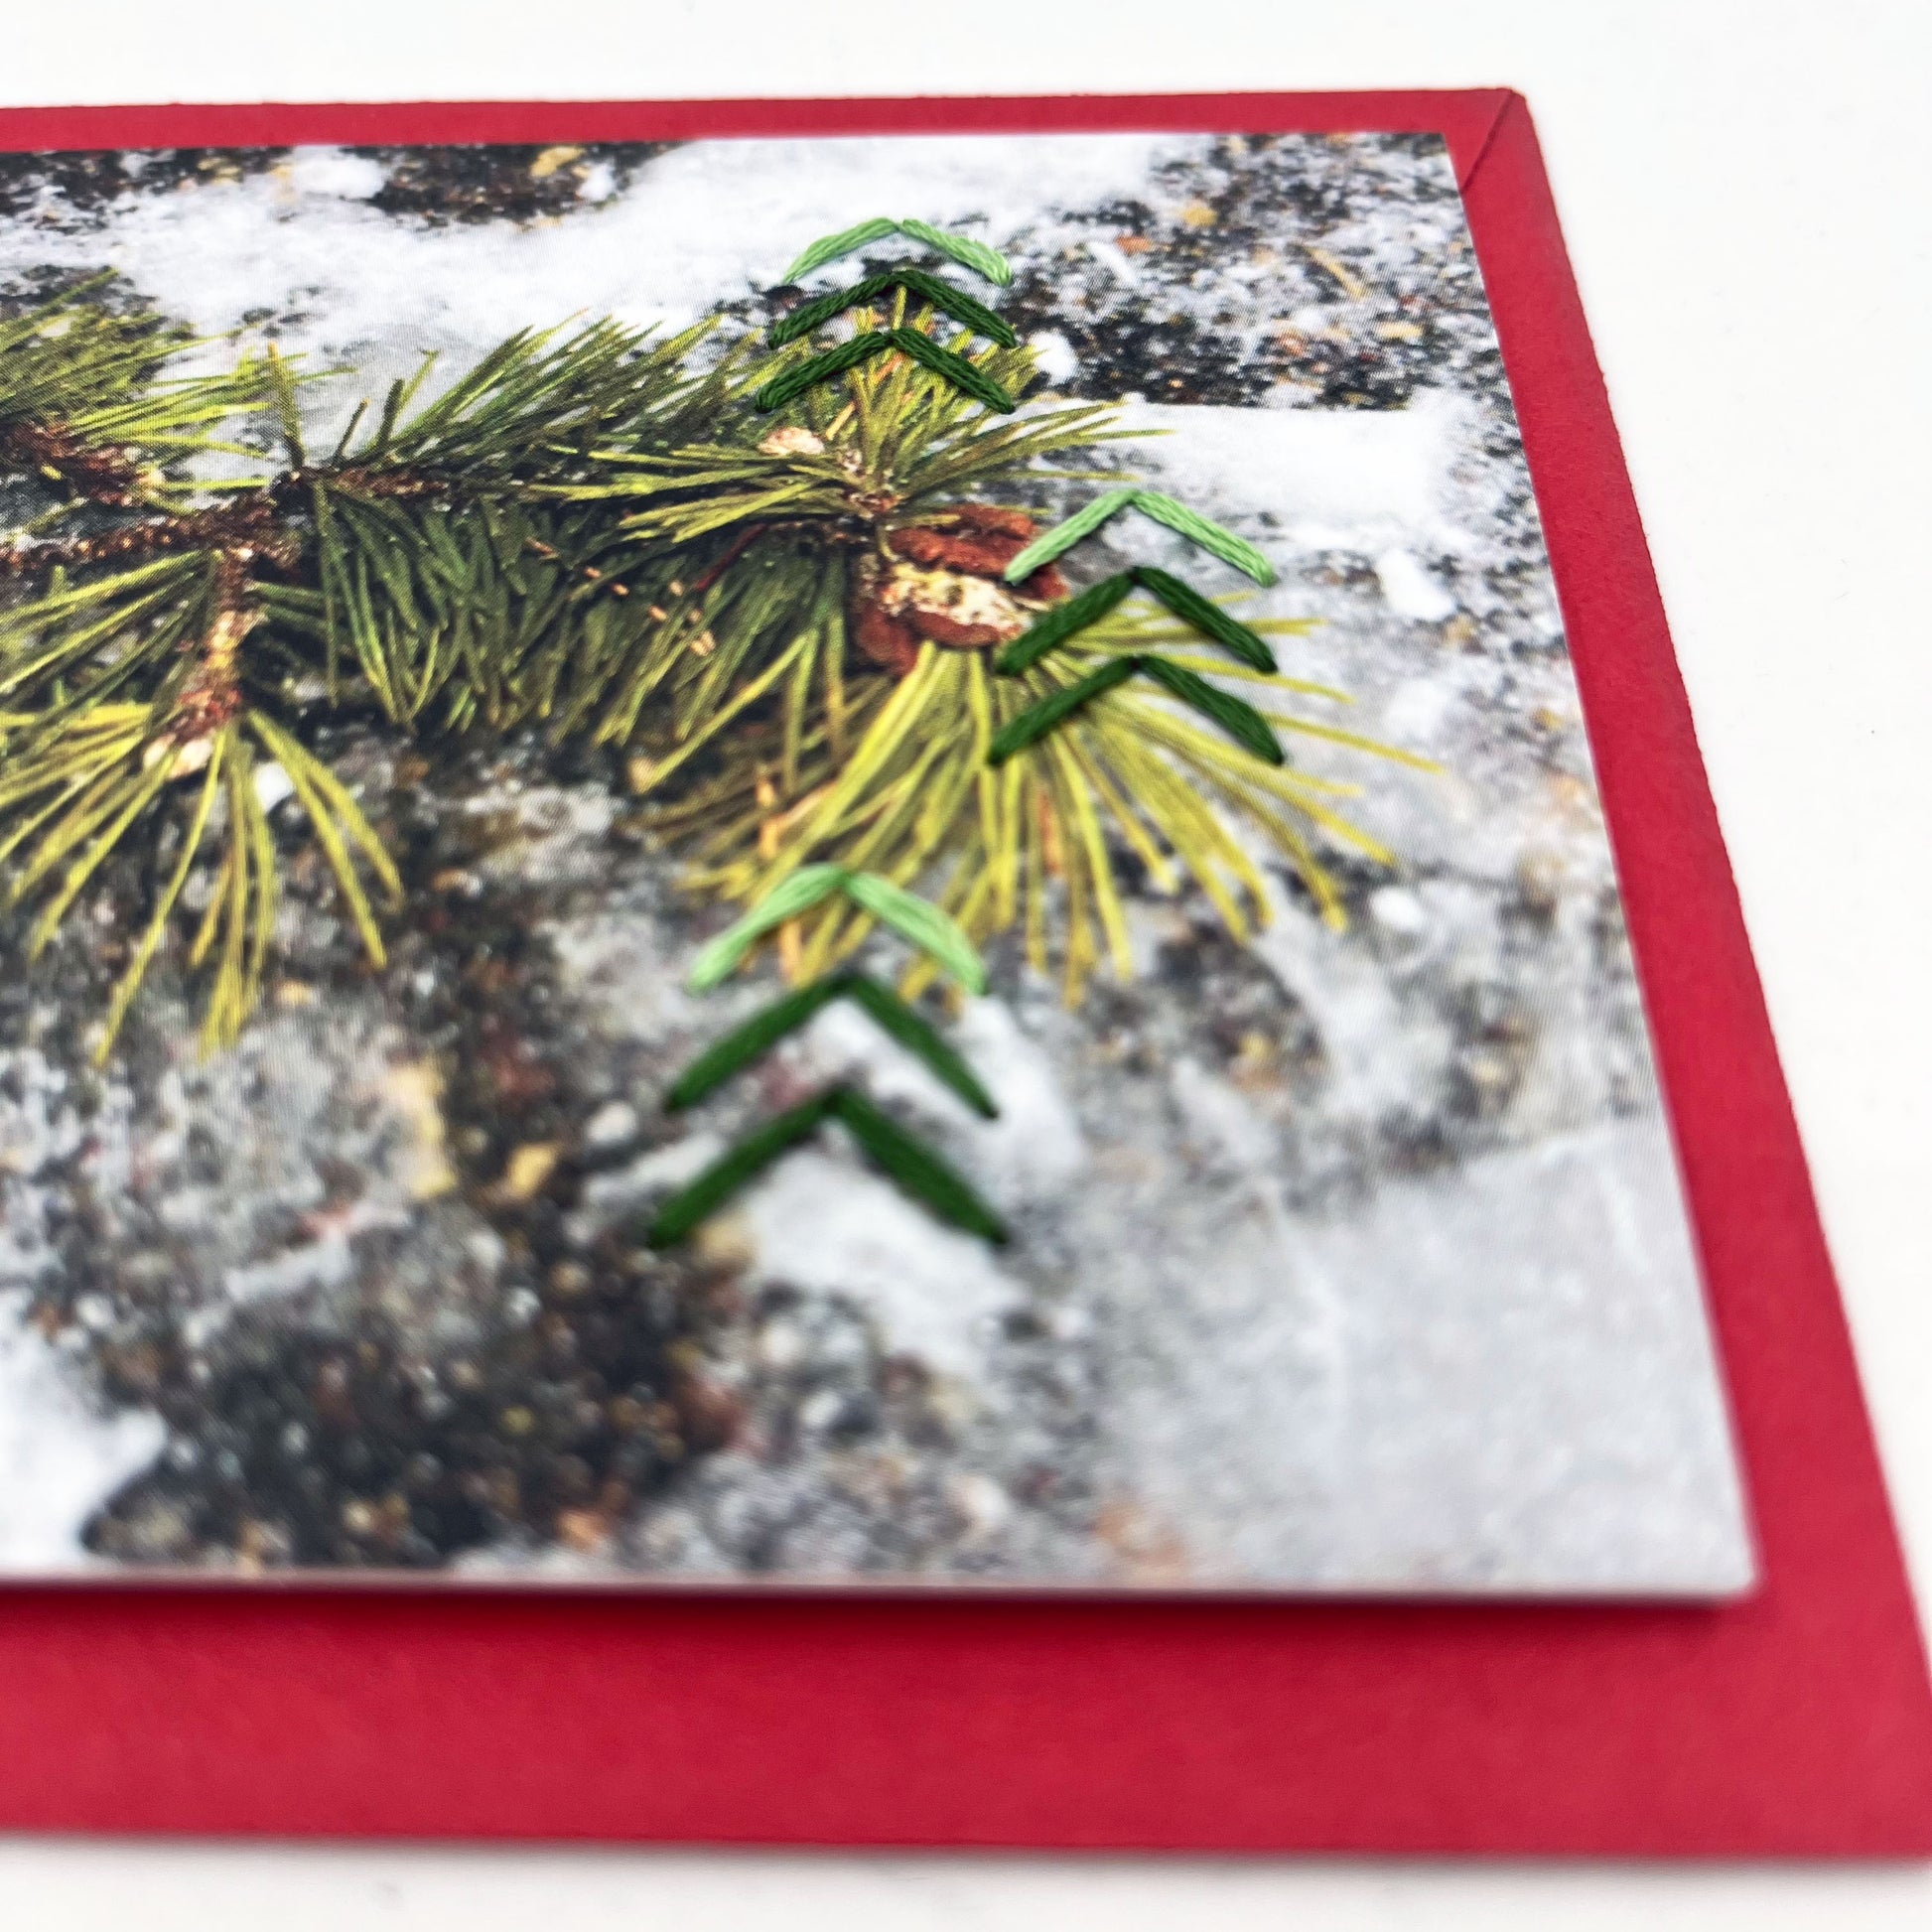 Greeting card flat on an envelope. Photo of pine tree branch in snow. Green stitches of groups of 3 chevrons to create abstract pine tree shape